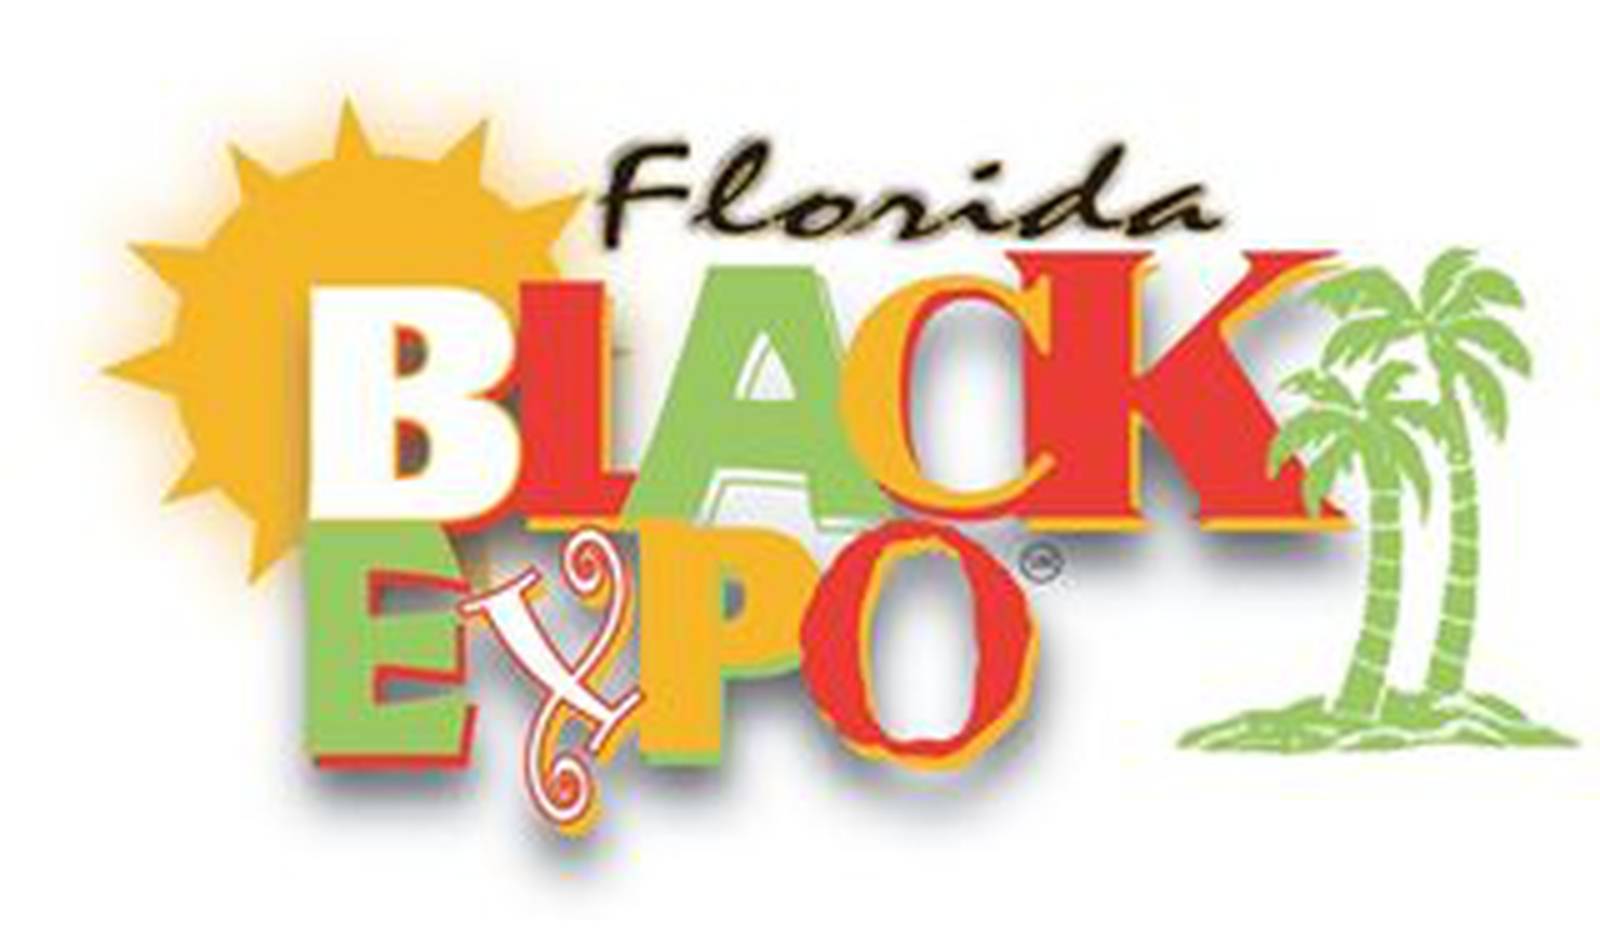 Jacksonville hosting annual Florida Black Expo this weekend Action